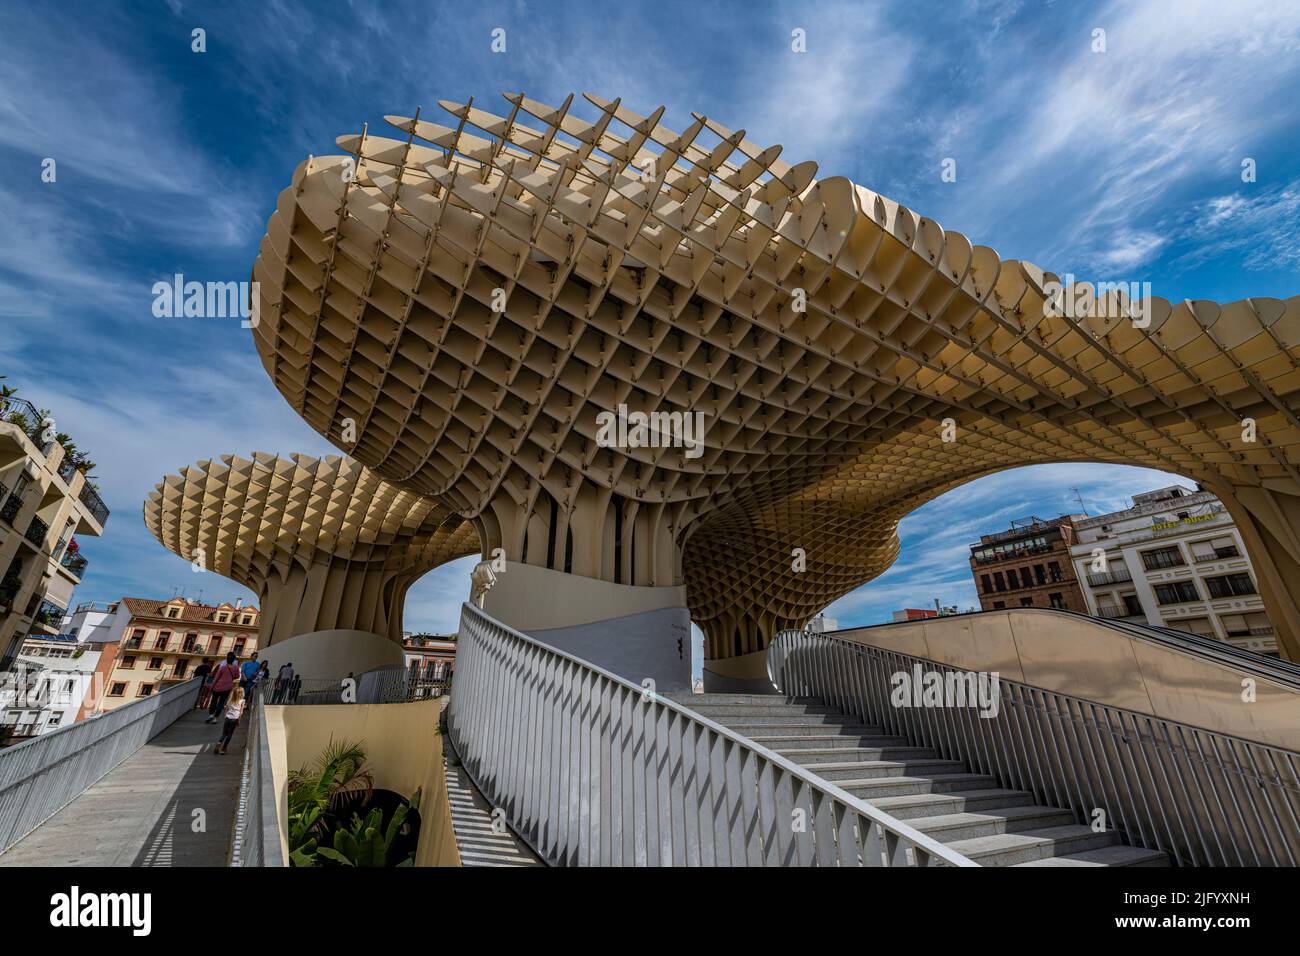 Metropol Parasol, one of the largest wooden structures, Seville, Andalucia, Spain, Europe Stock Photo